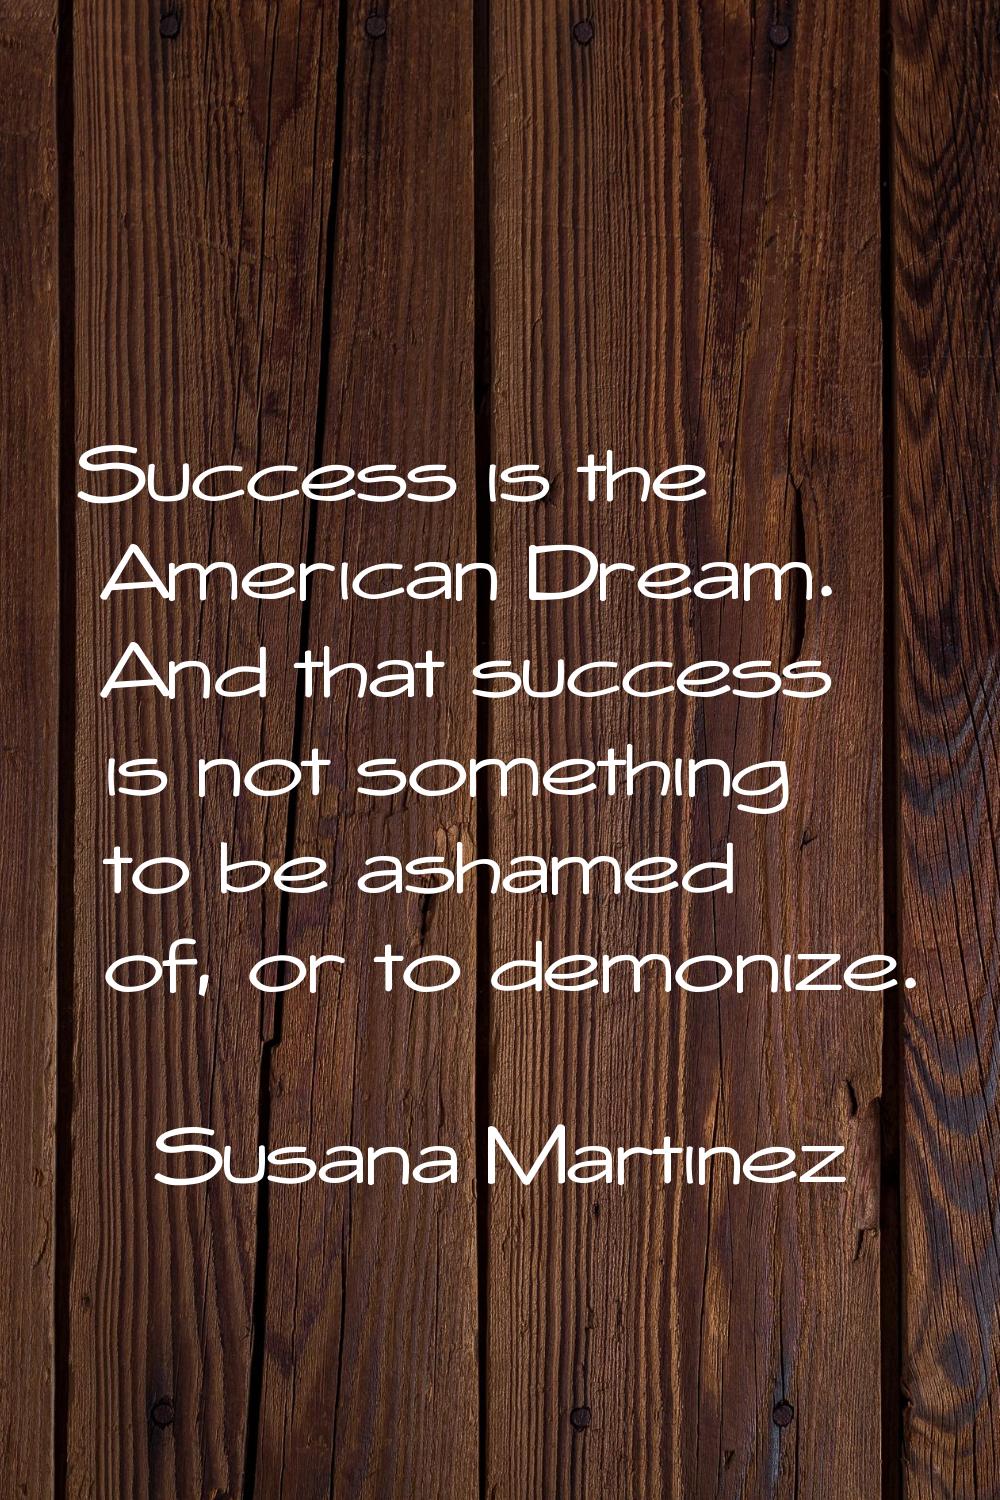 Success is the American Dream. And that success is not something to be ashamed of, or to demonize.